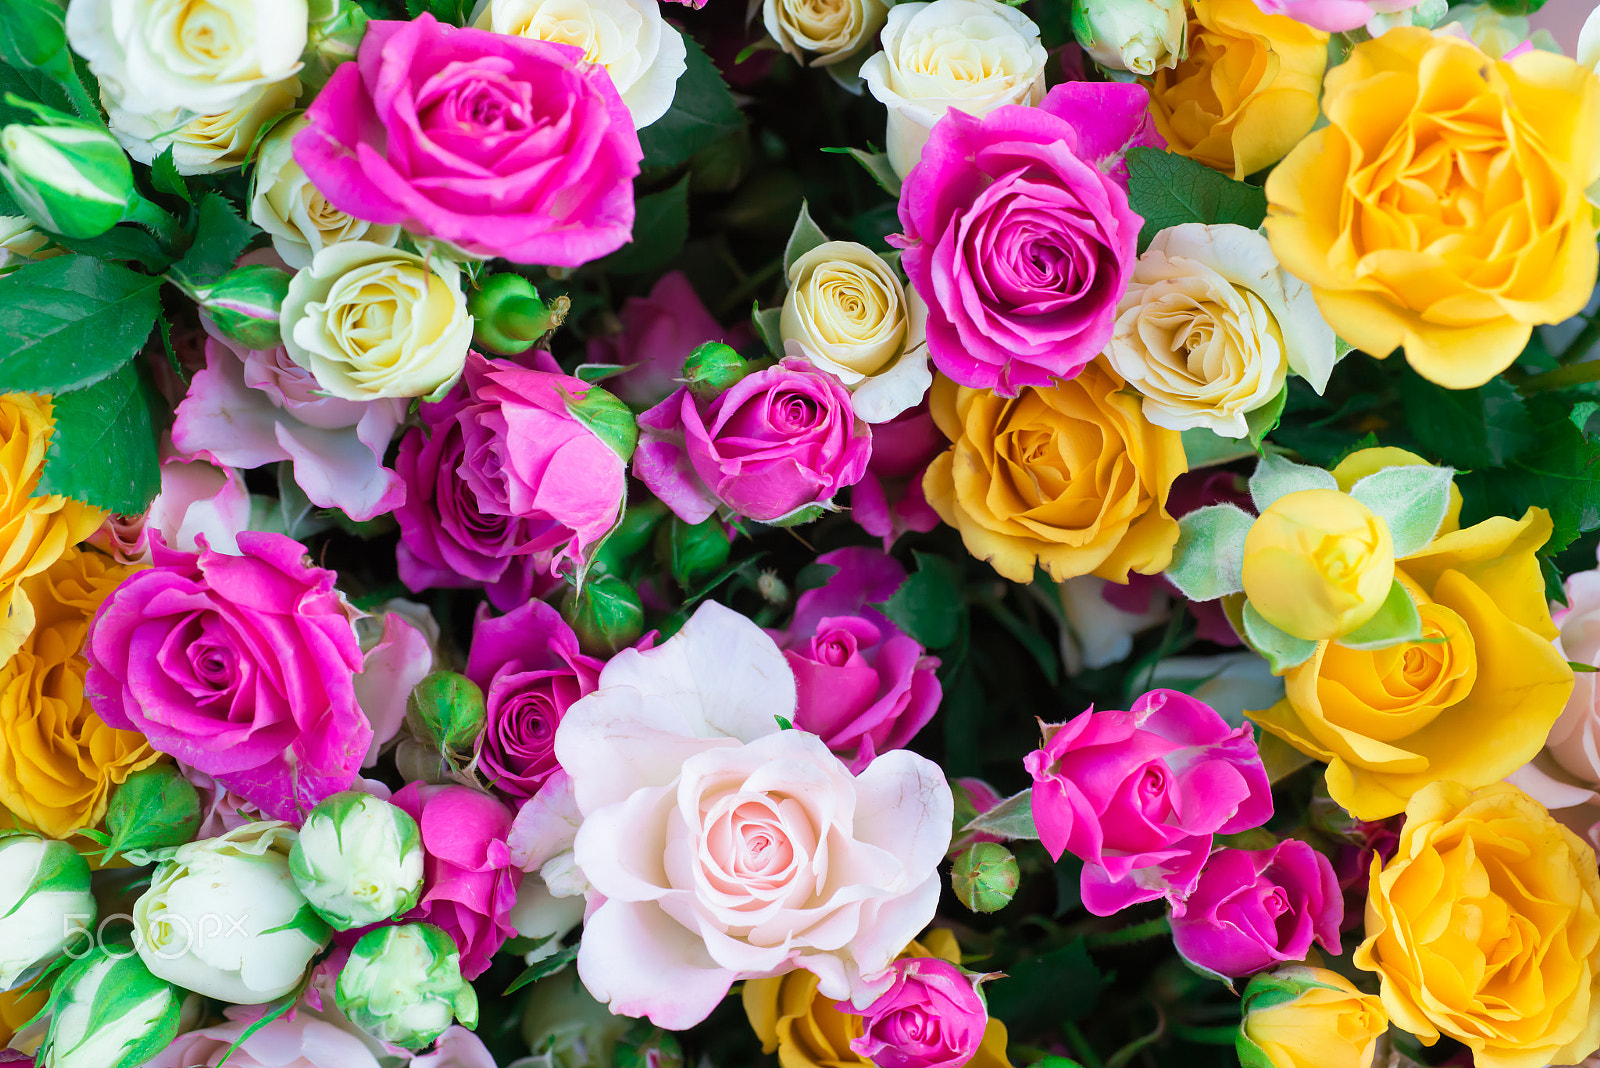 Nikon D800 + Sigma 70mm F2.8 EX DG Macro sample photo. Fresh colorful roses with green leaves photography